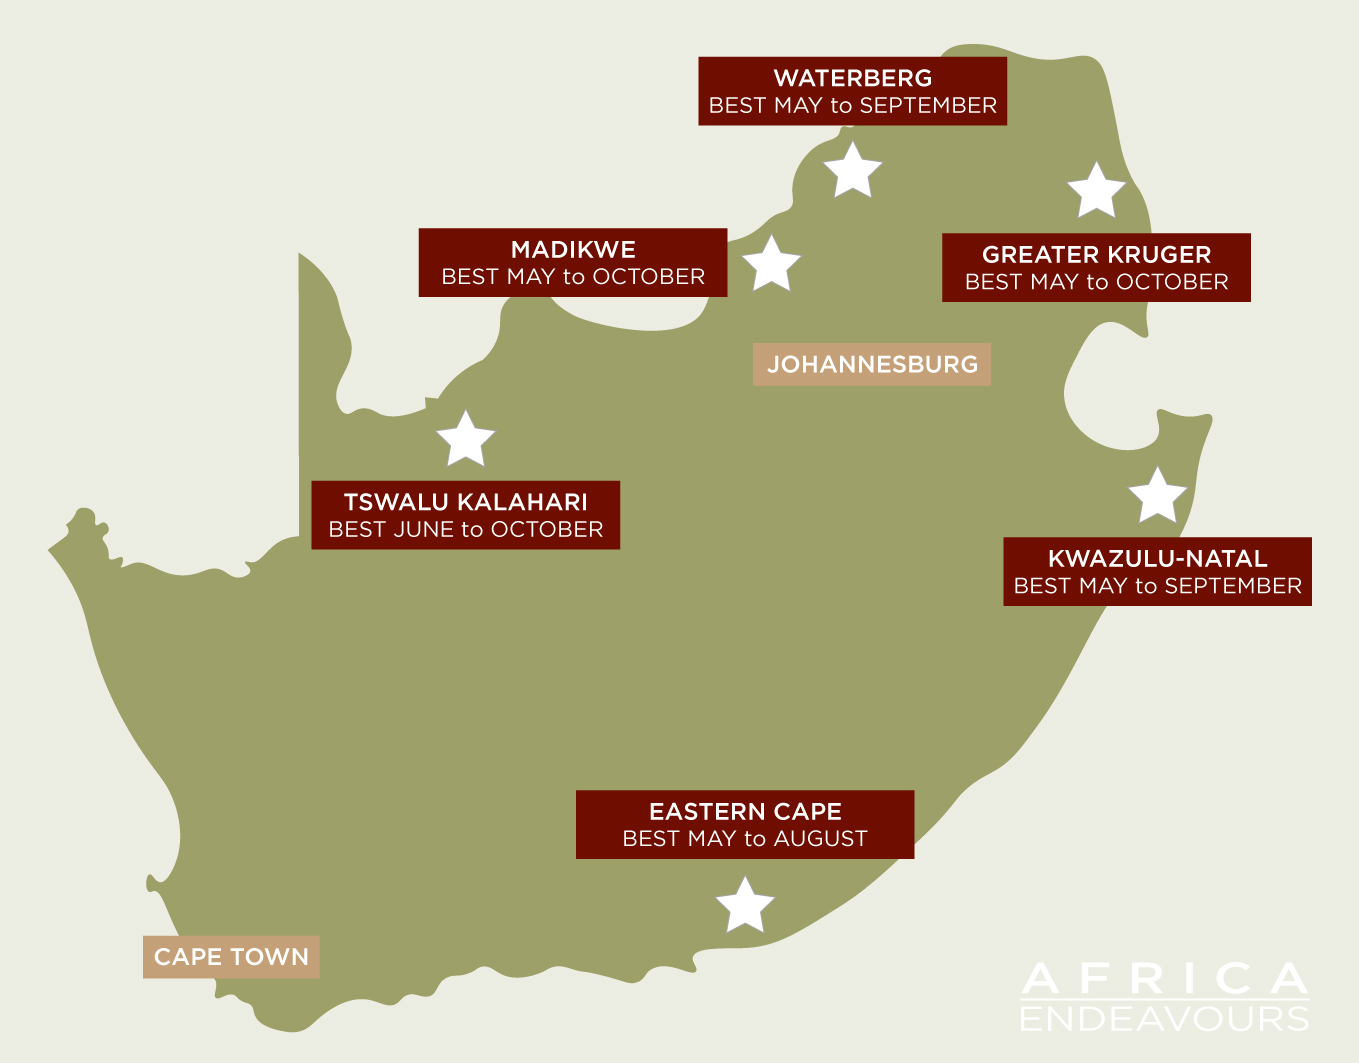 South Africa Luxury Safaris - Where to Go